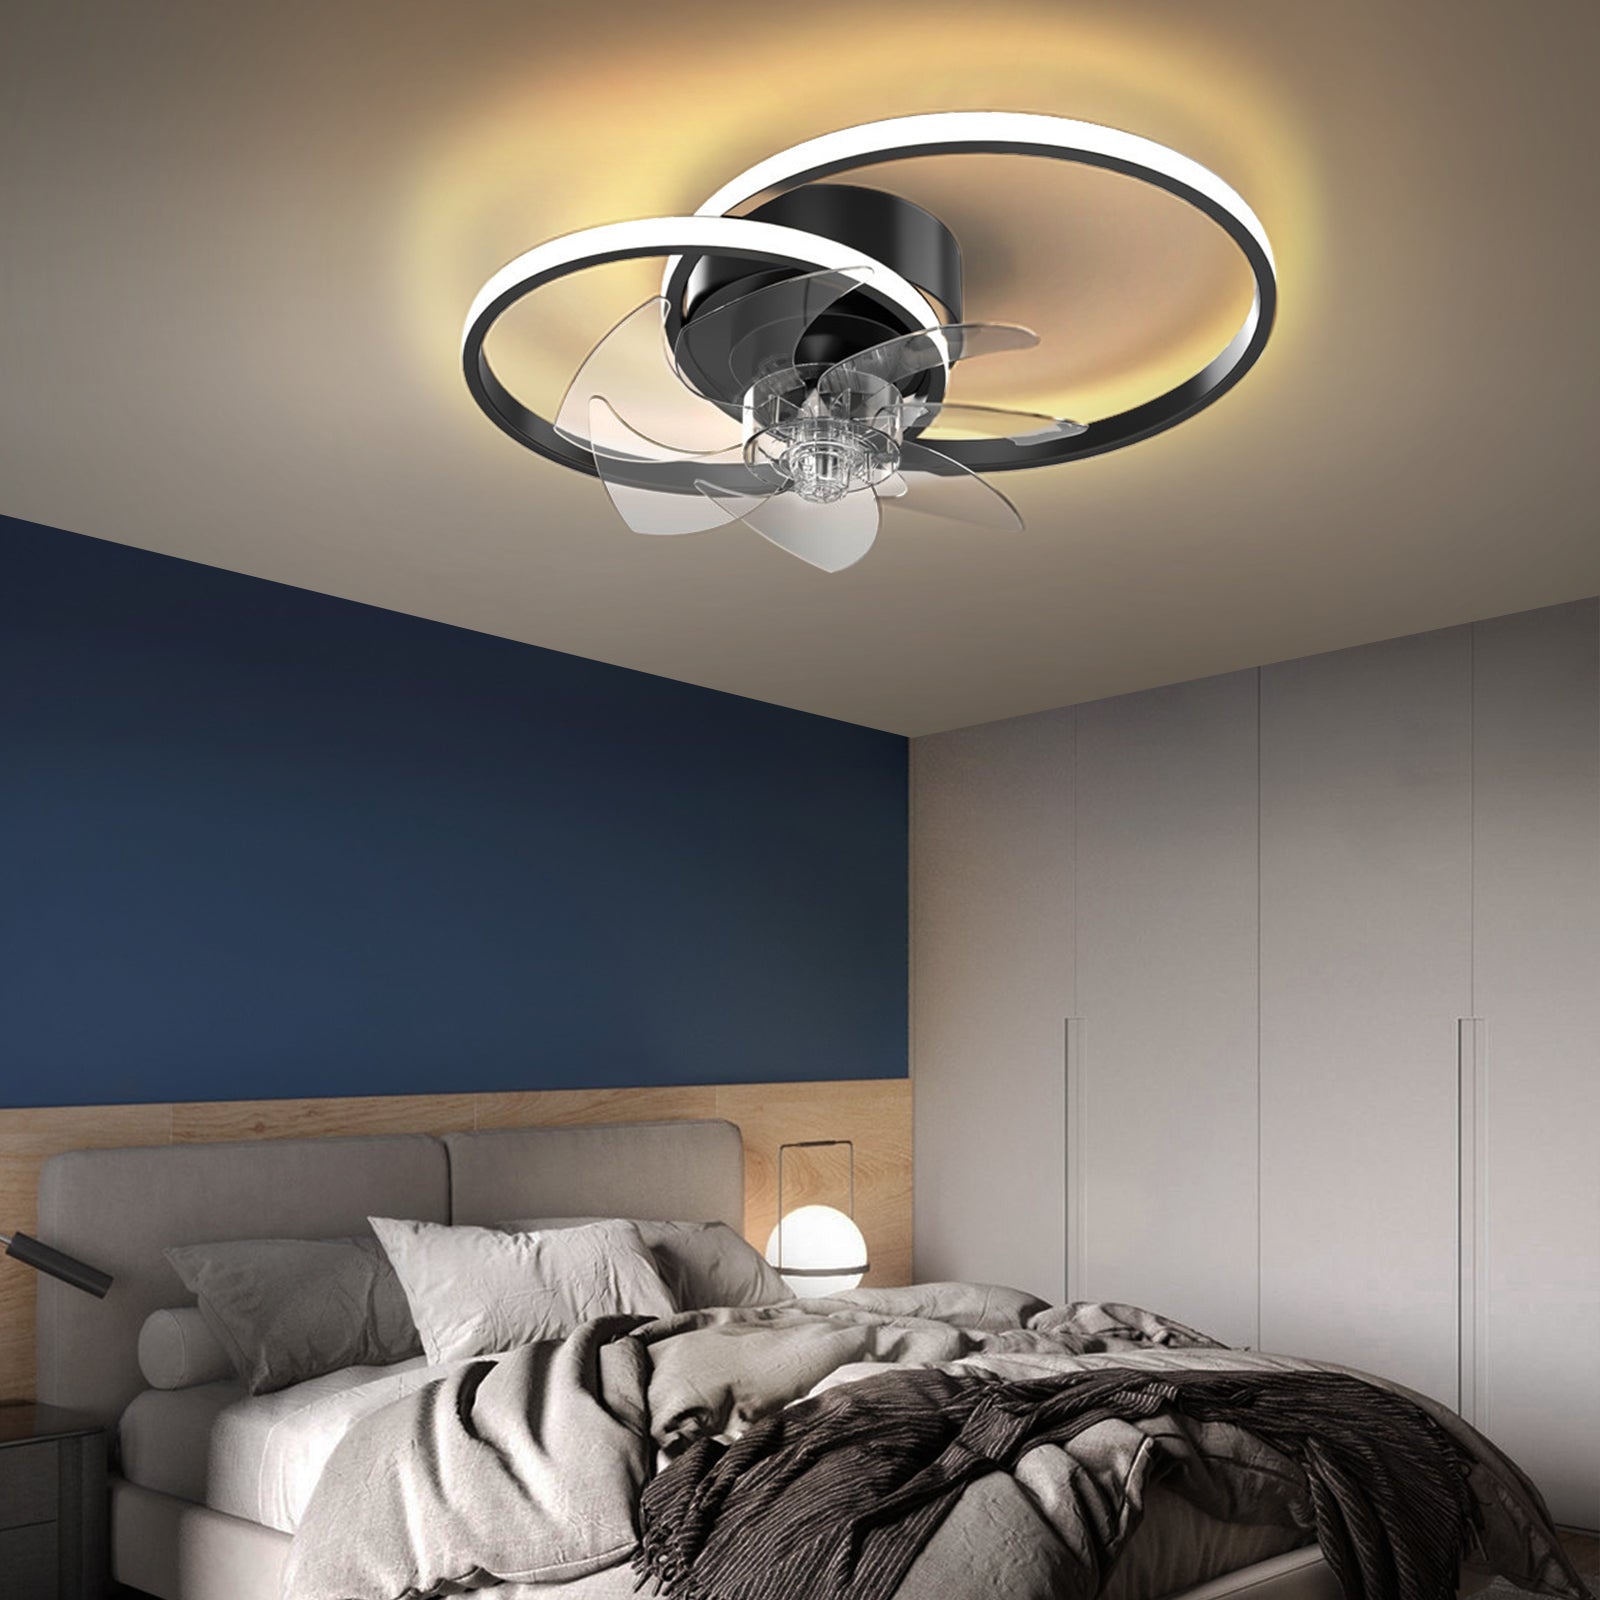 REYDELUZ 19.6 Inch Ceiling Fan Equipped with Light and Remote Control Device Adjustable Tricolor Light Suitable for Bedrooms and Restaurants